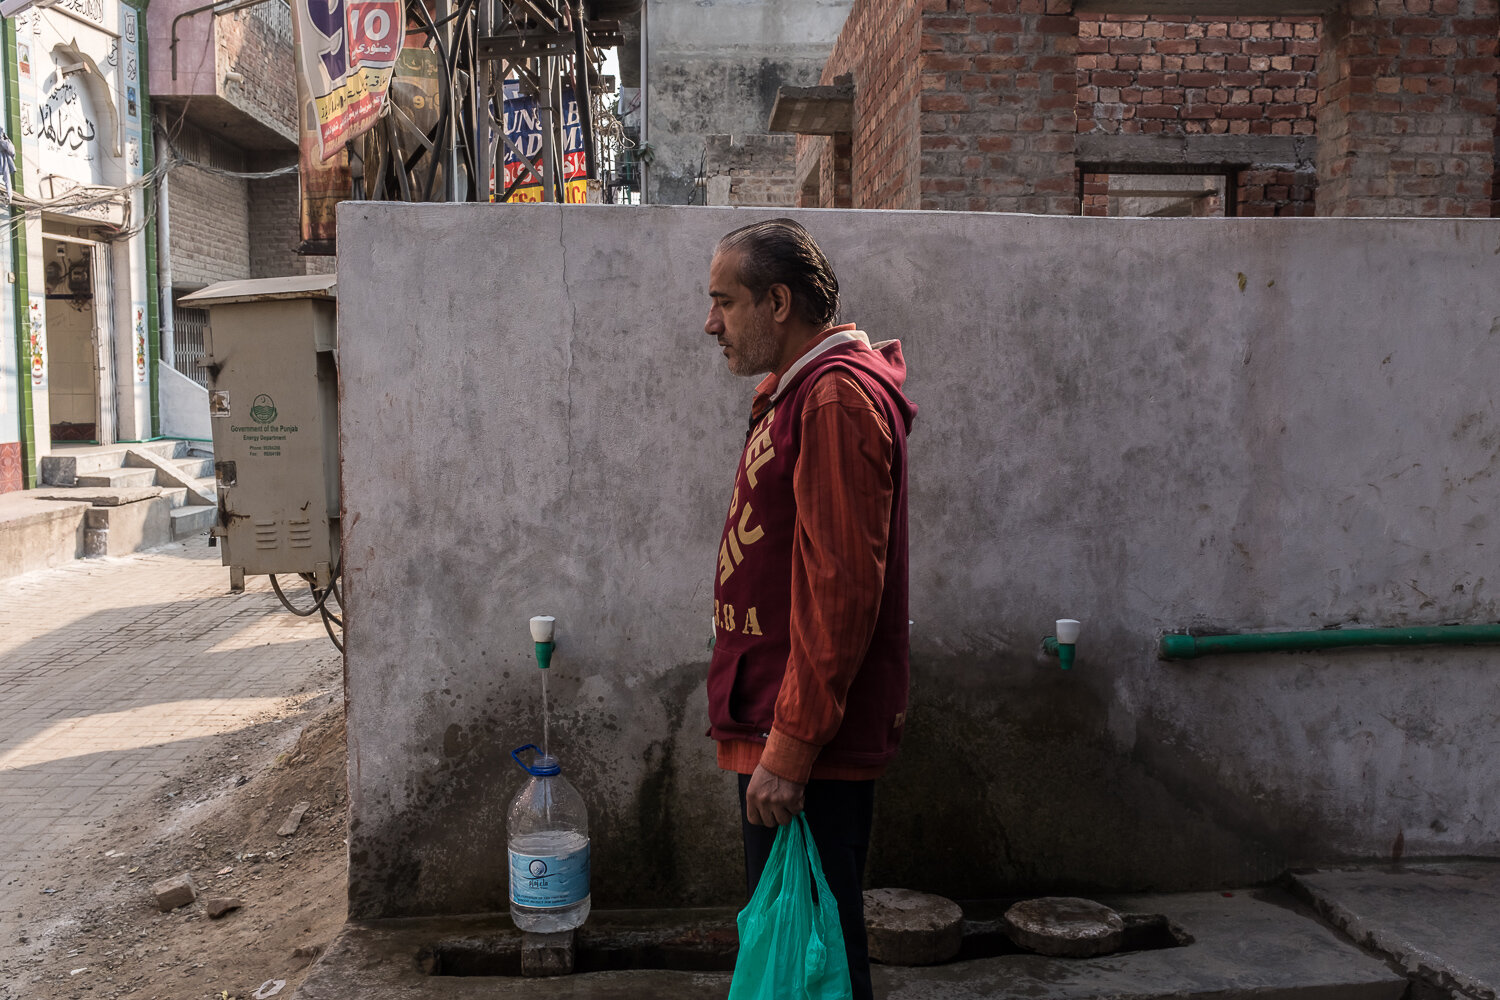  A man fills bottles with water at a community tap on Monday, November 20, 2017 in Lahore, Punjab, Pakistan. Many parts of the city do not have running water in every house, and in those that do the water is unsafe to drink. In 2018 Lahore was forced